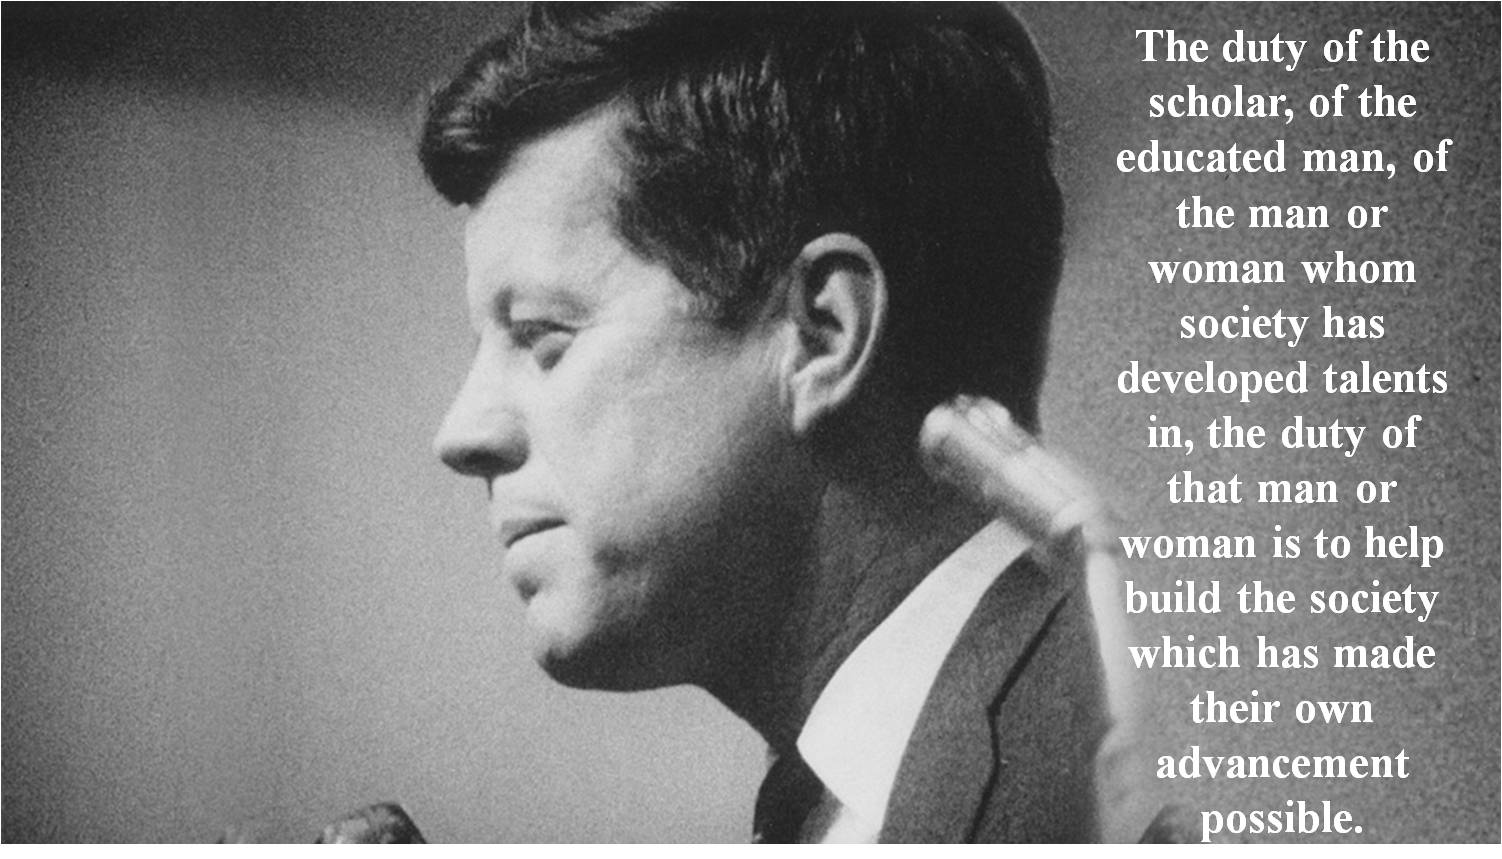 In Memory of JFK: "The rights of man come not from the generosity of